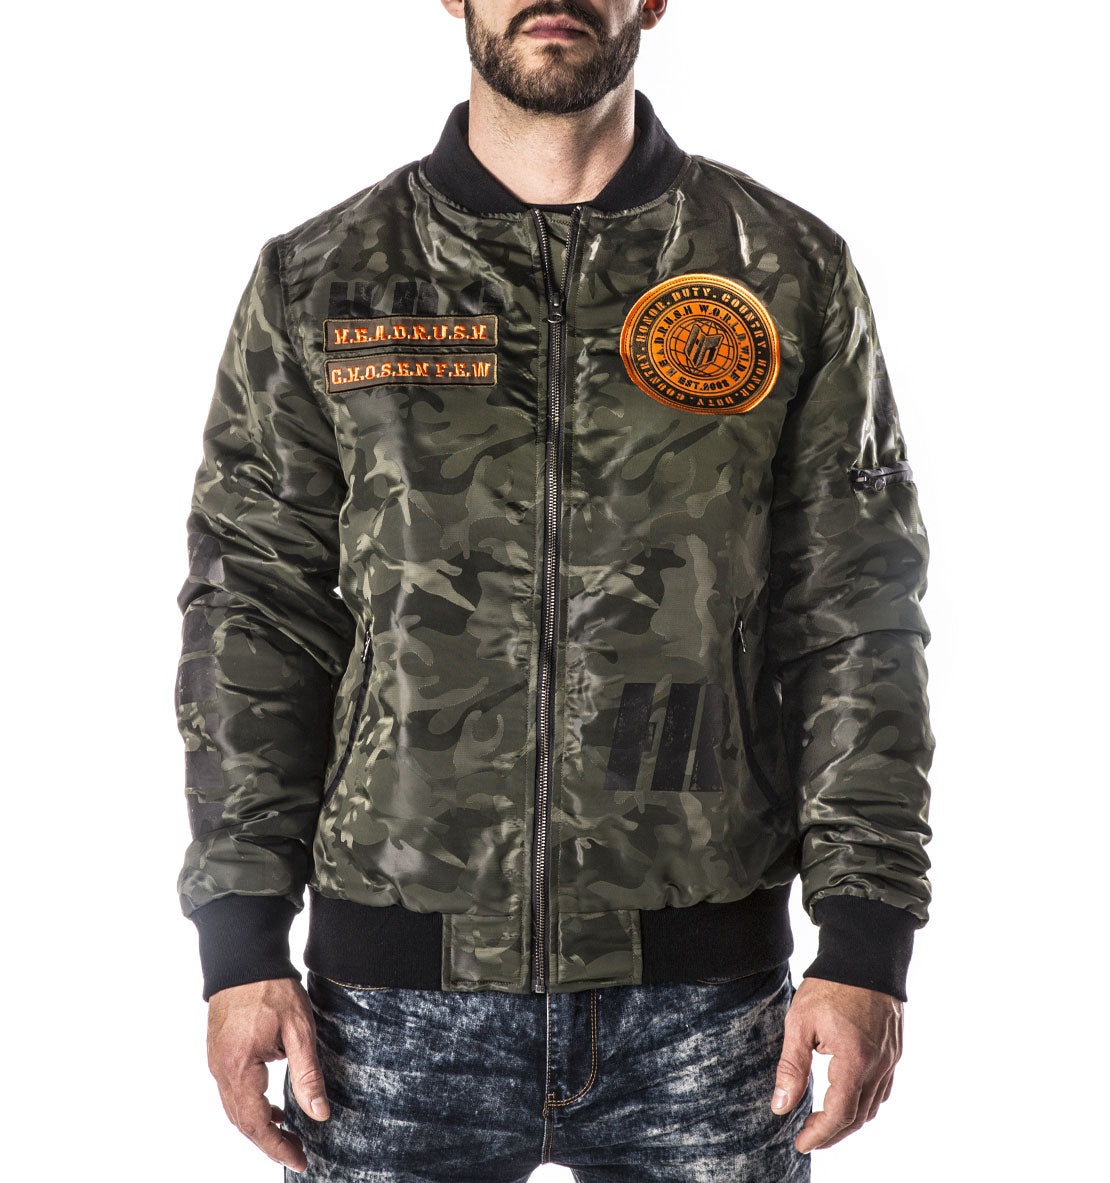 THE HONORED TO SERVE MENS BOMBER JACKET – HR Distribution